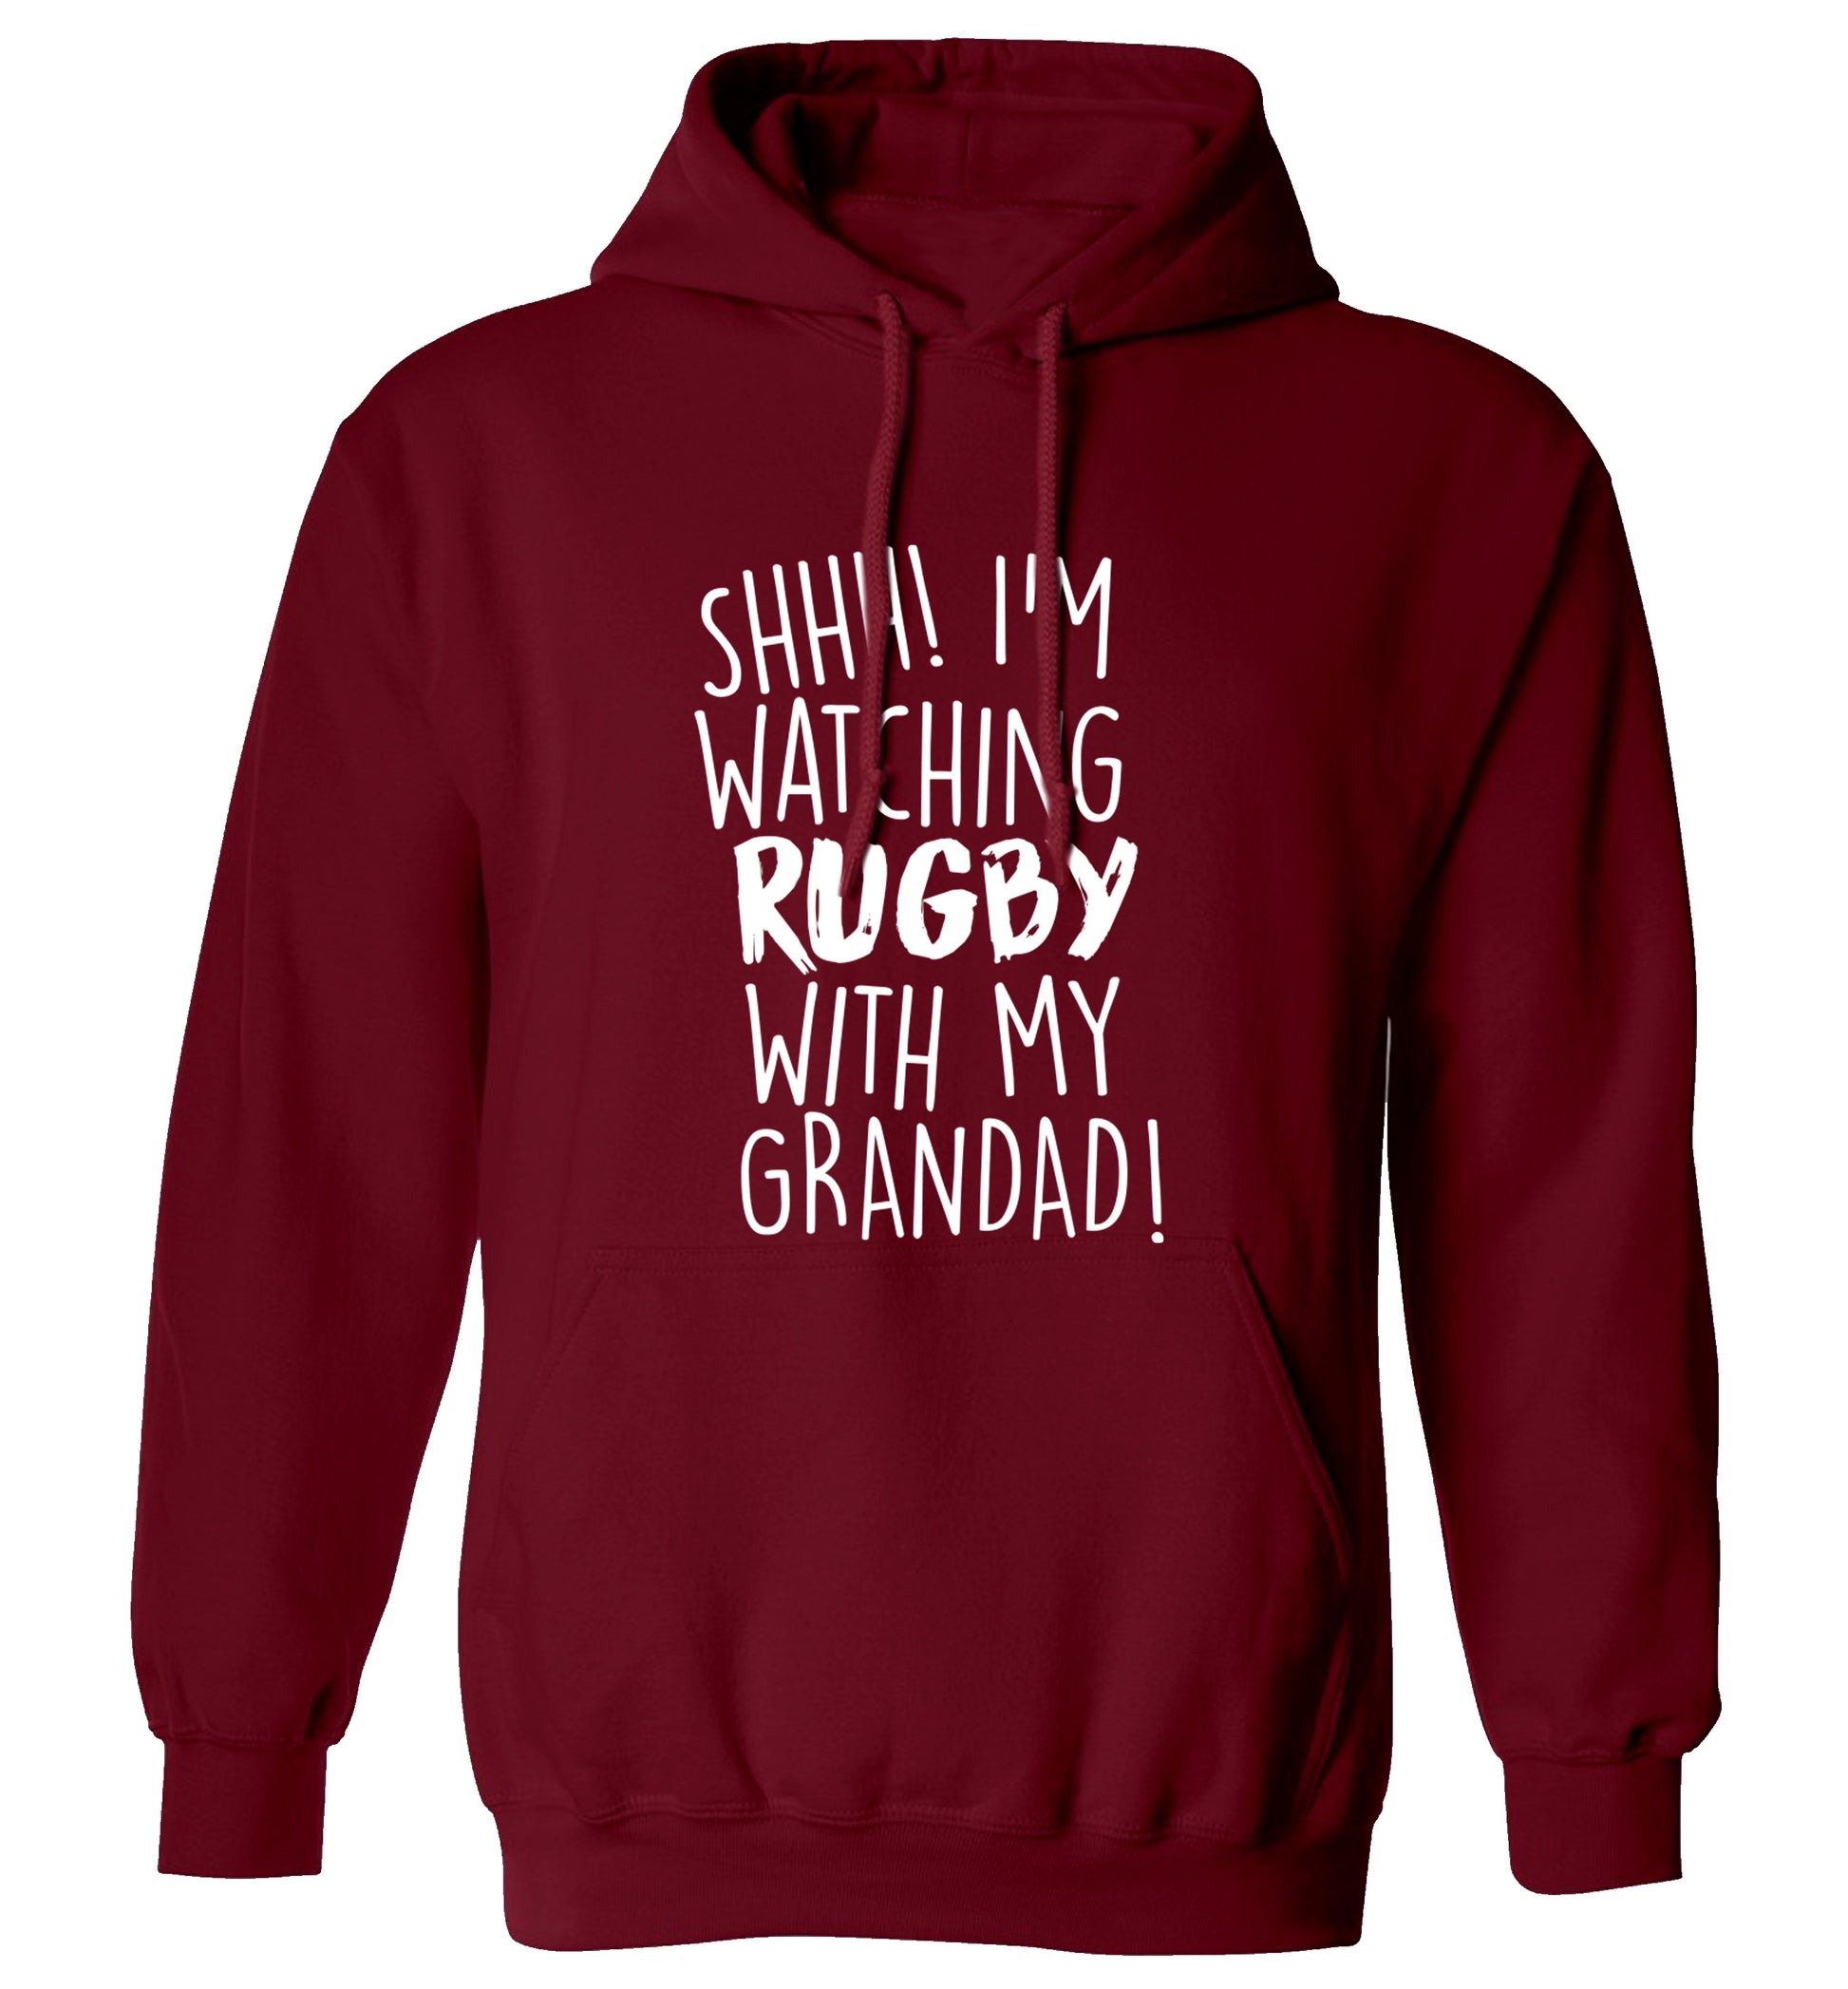 Shh I'm watching rugby with my grandad adults unisex maroon hoodie 2XL